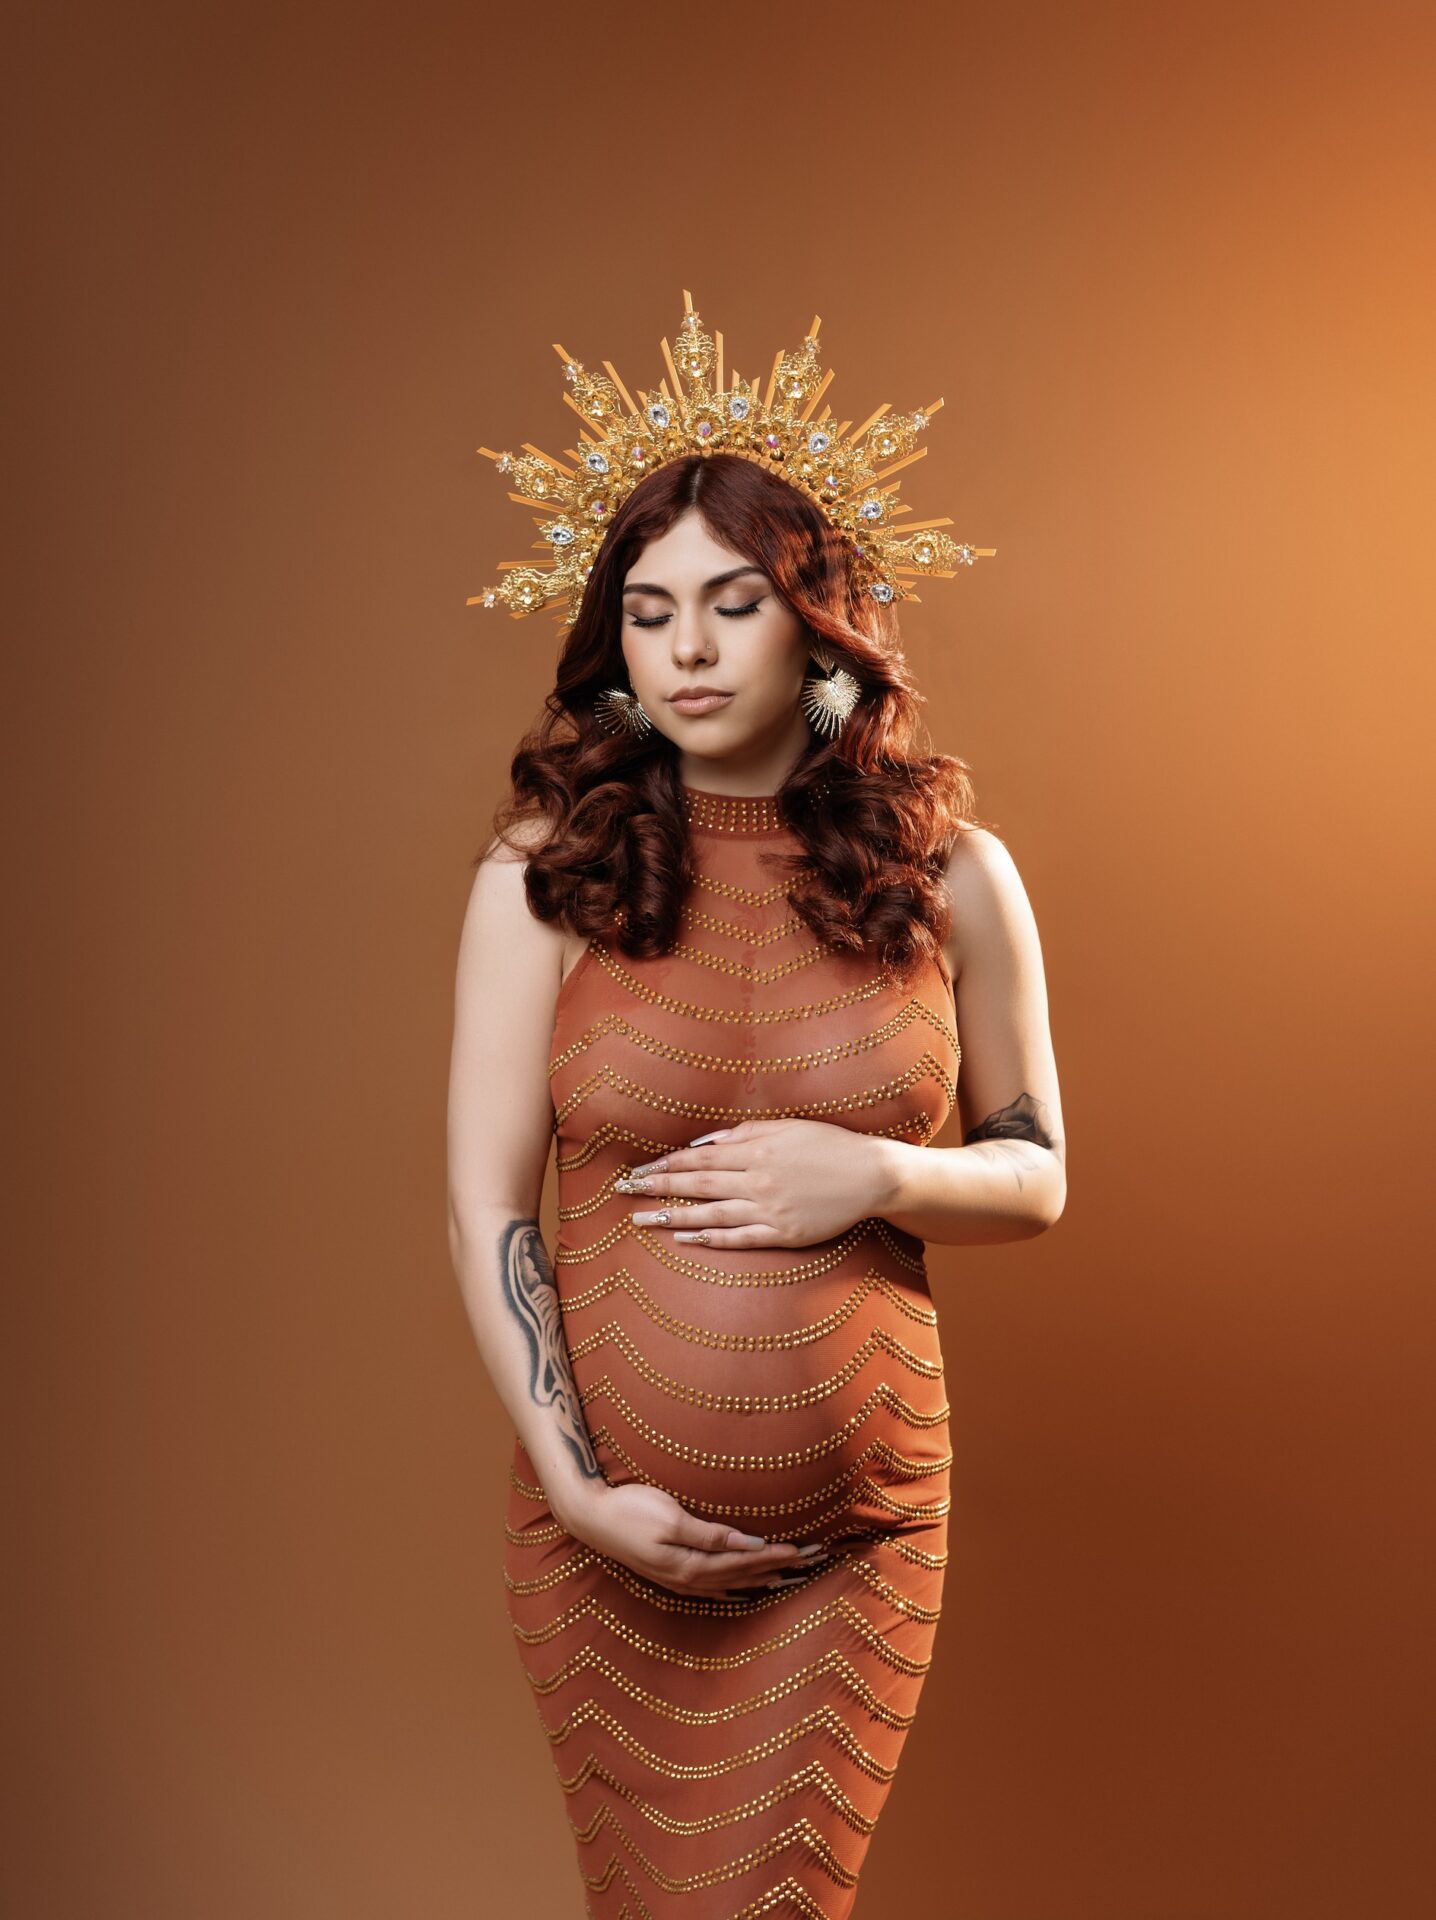 pregnant women in photoshoot with crown and gold wearing diamond dress